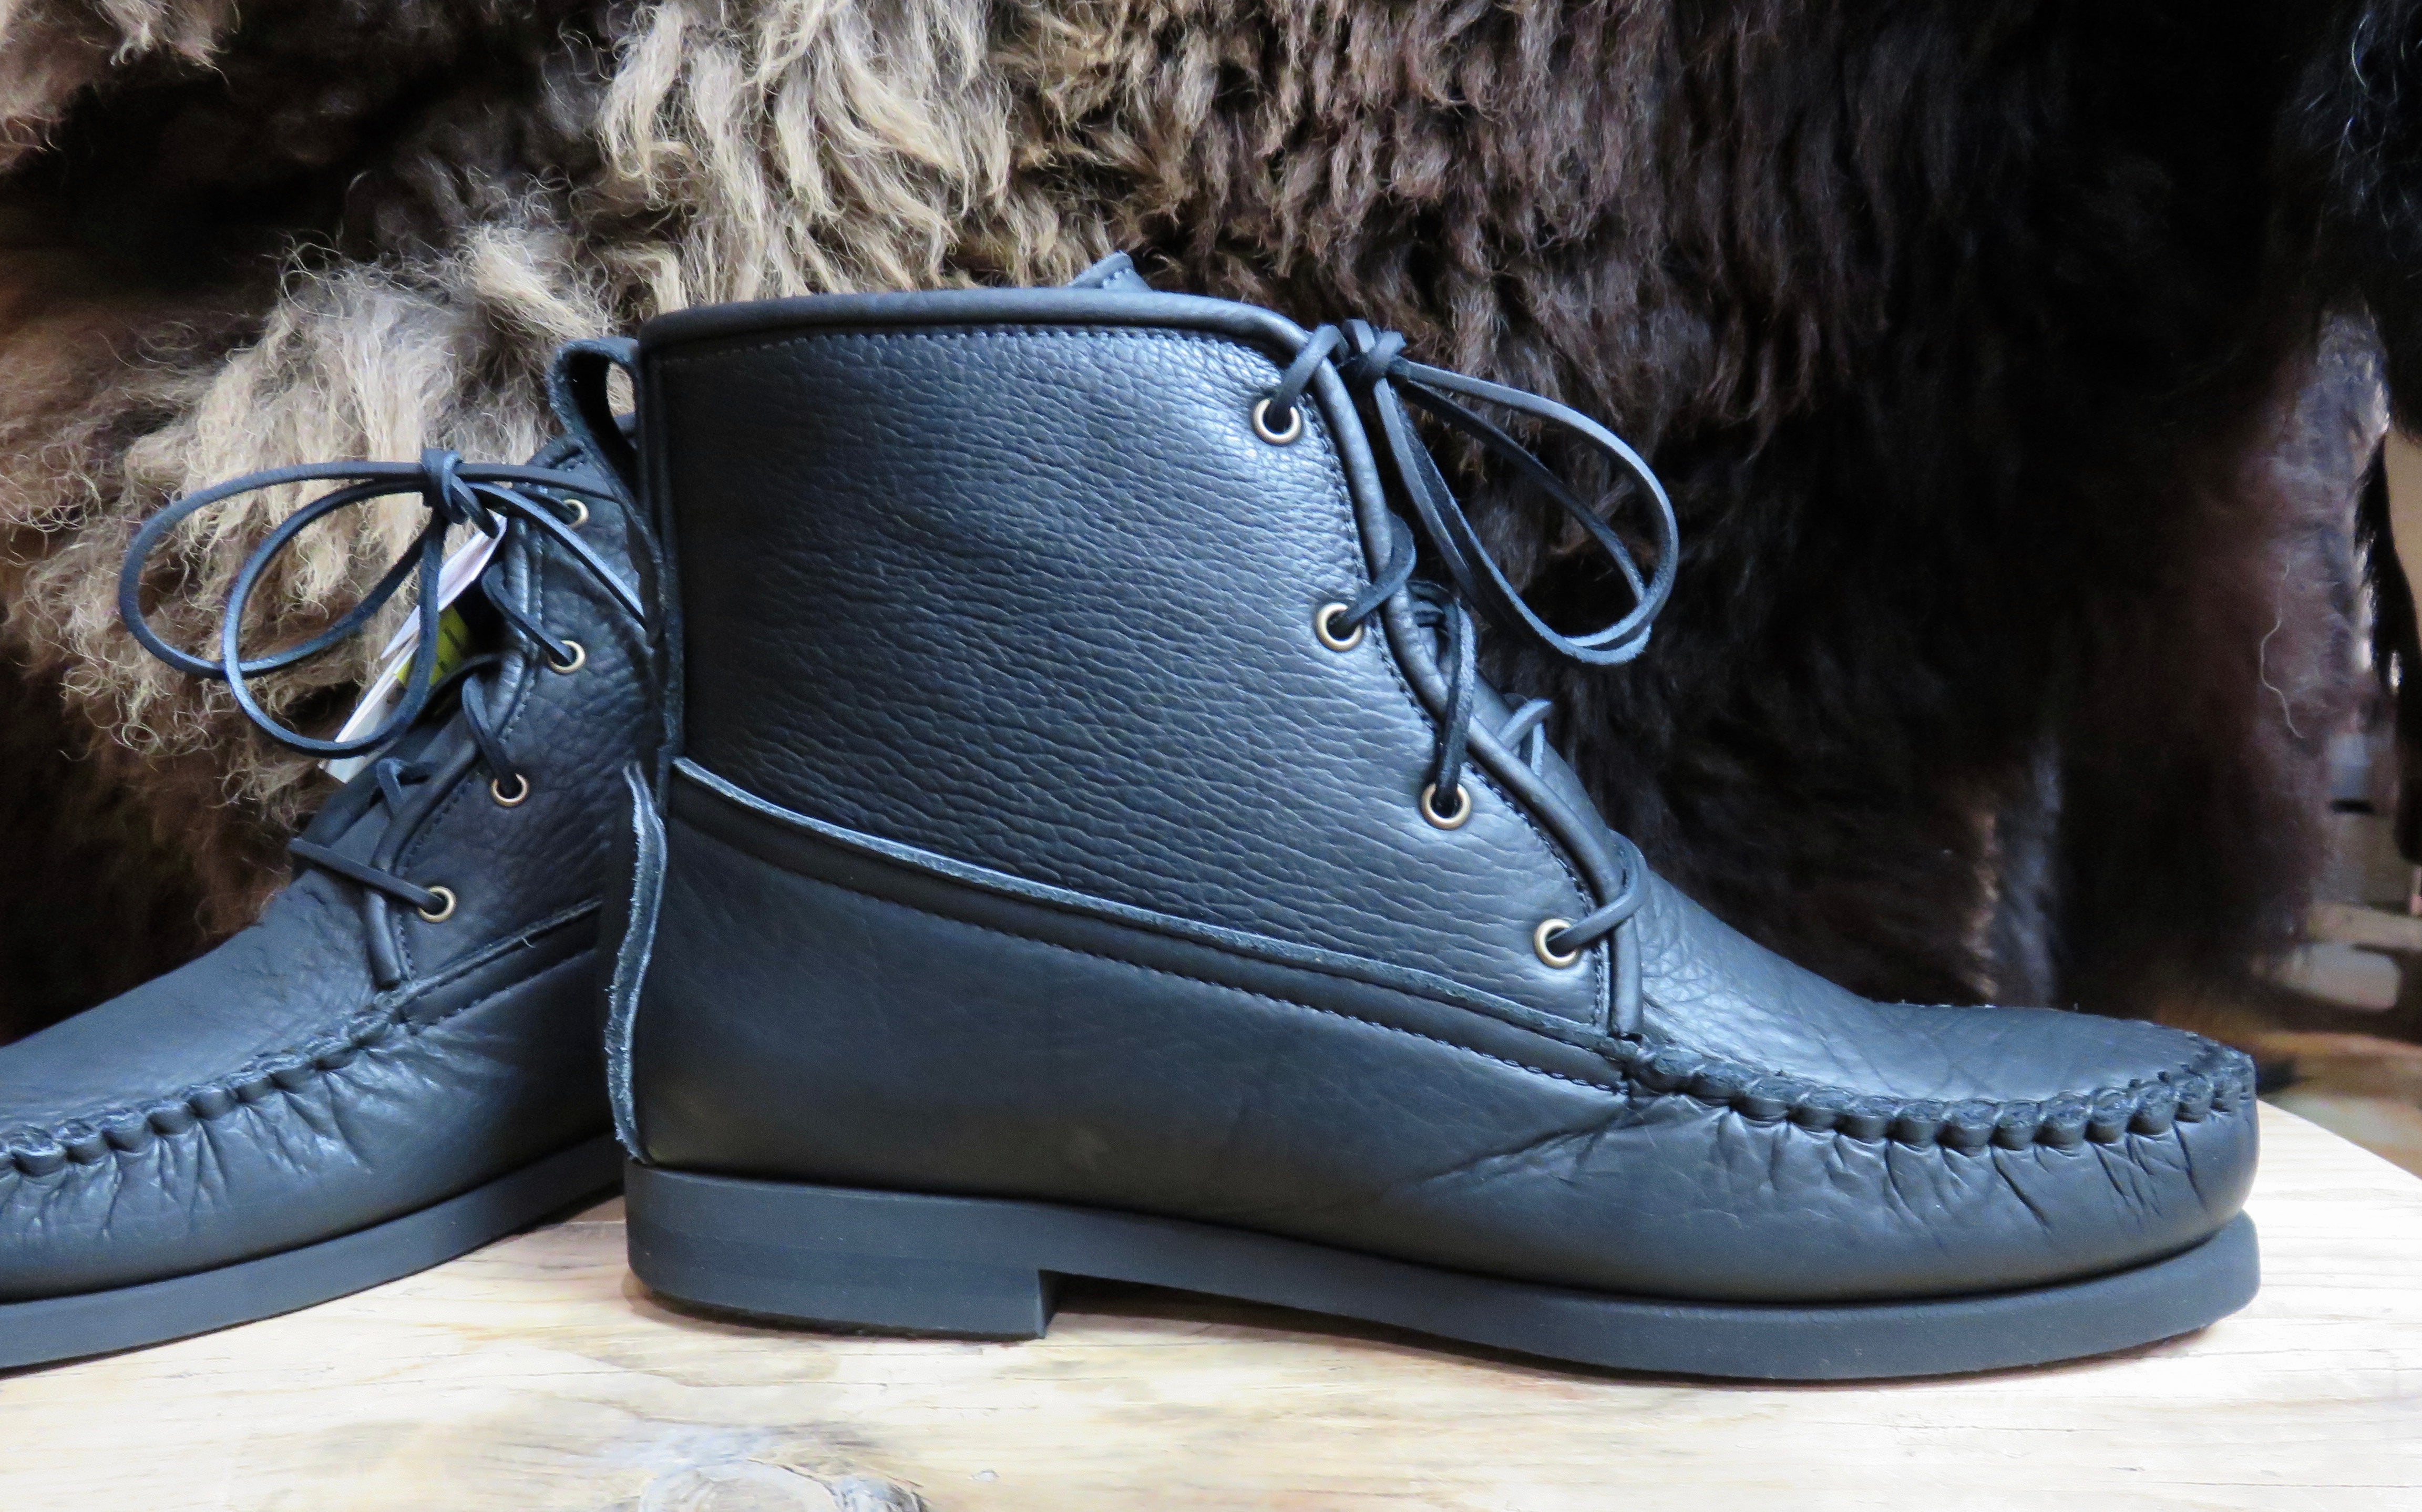 Footskins "Herd Wear" Bison Leather Chukka boots.  B 4540